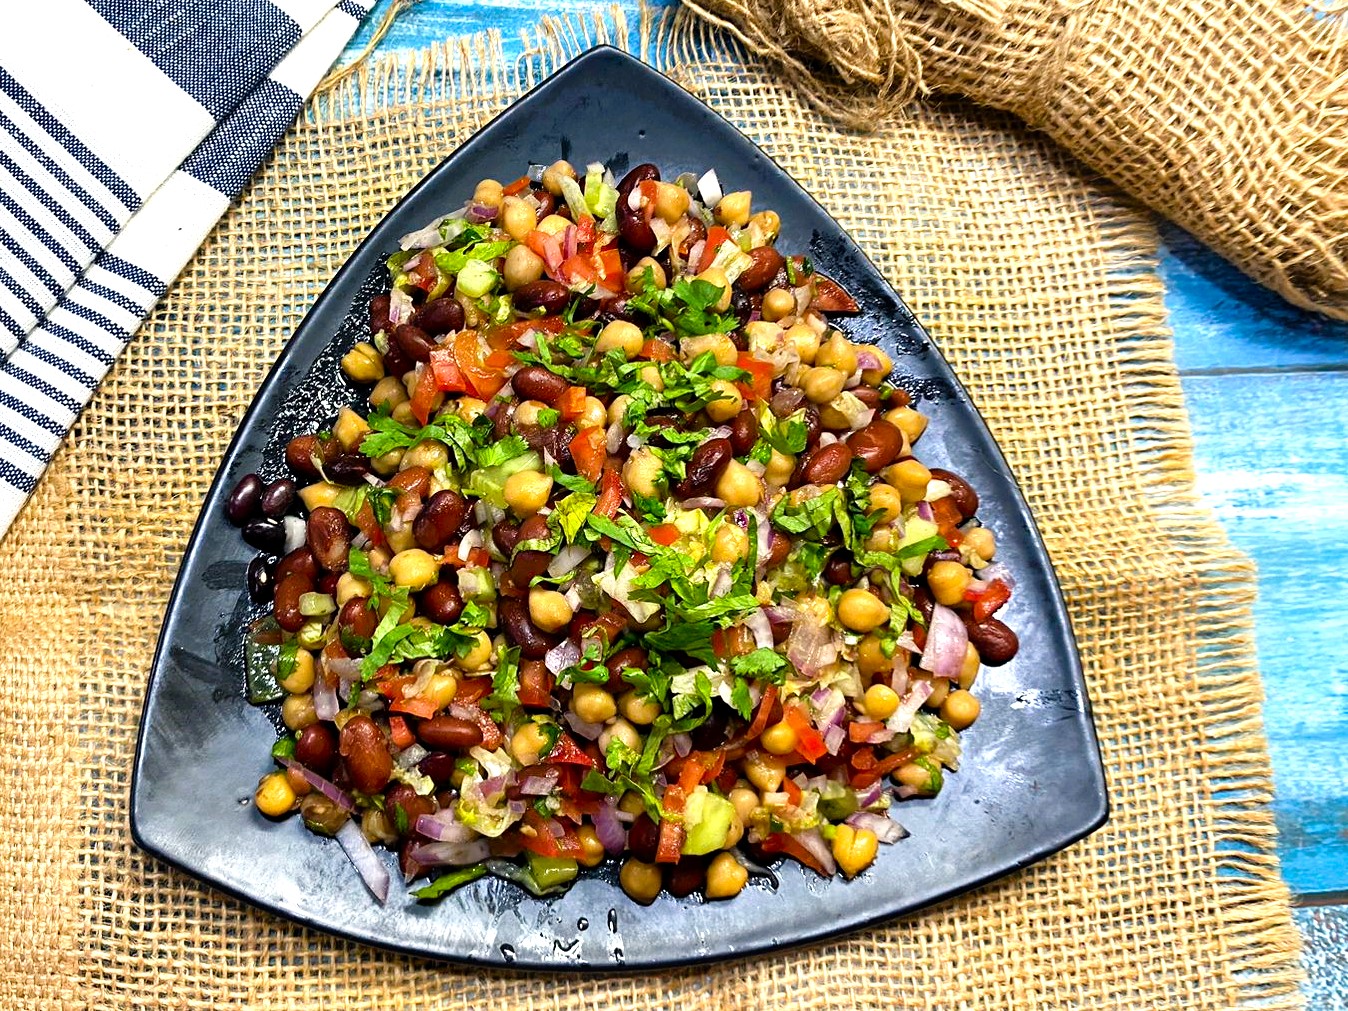 Chickpea and Kidney Bean Salad